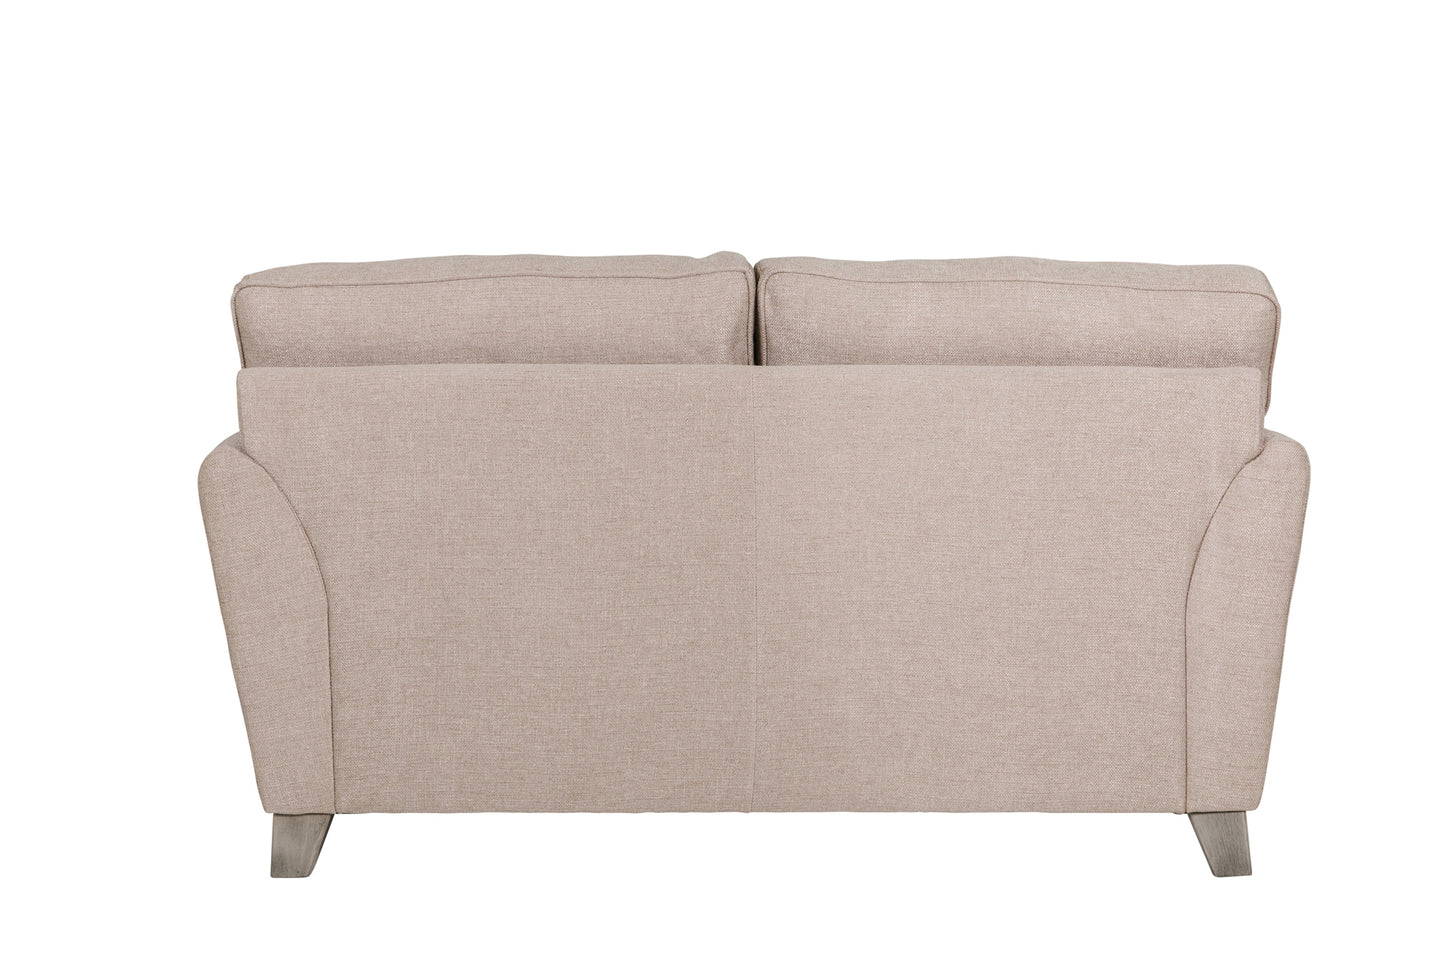 Cantrell Sofa Bed - Biscuit